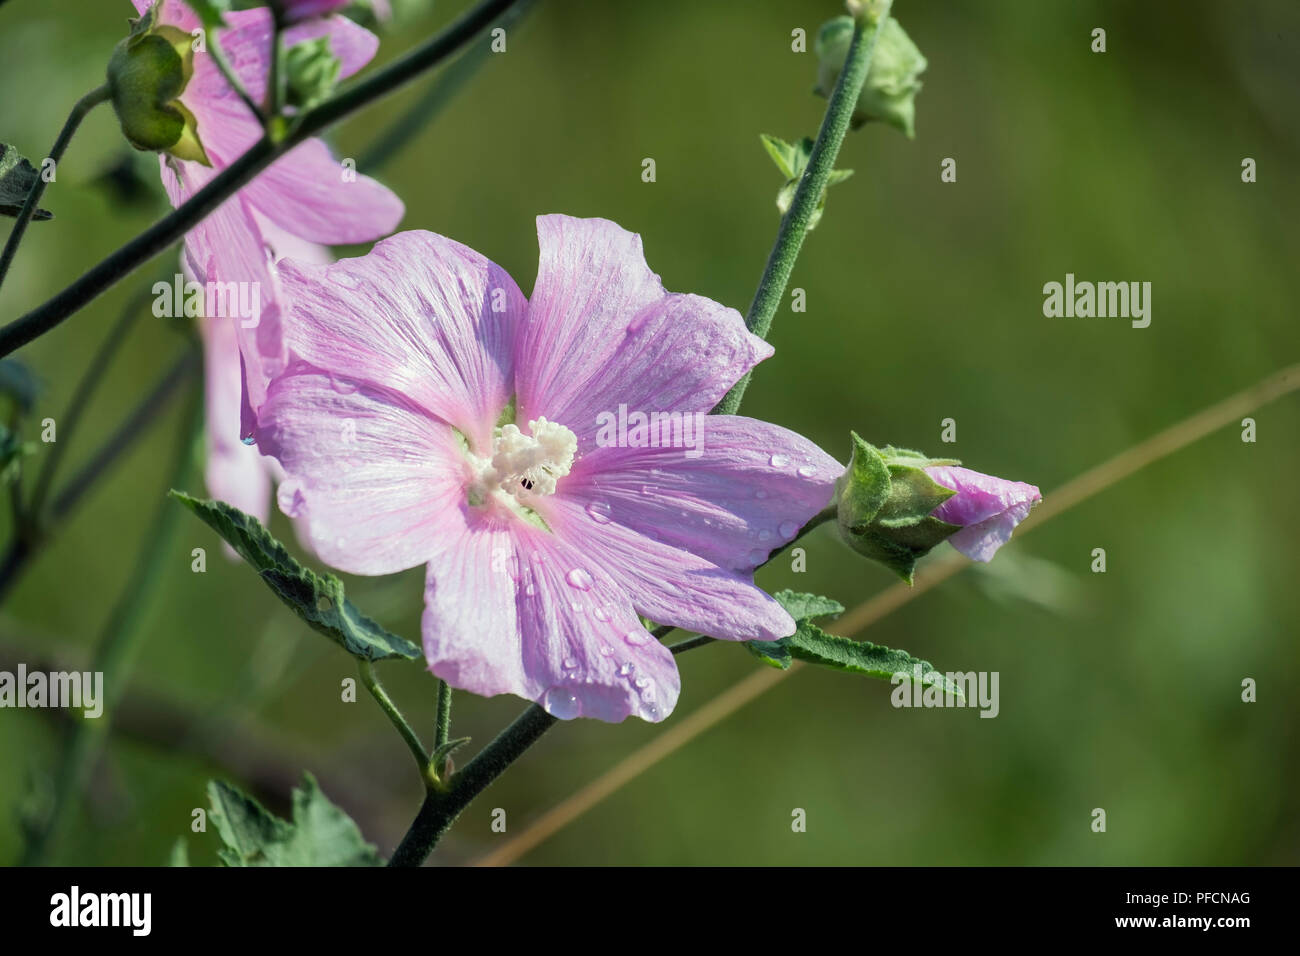 Flower of garden tree-mallow with droplets of dew on the petals (Lavatera thuringiaca) Stock Photo